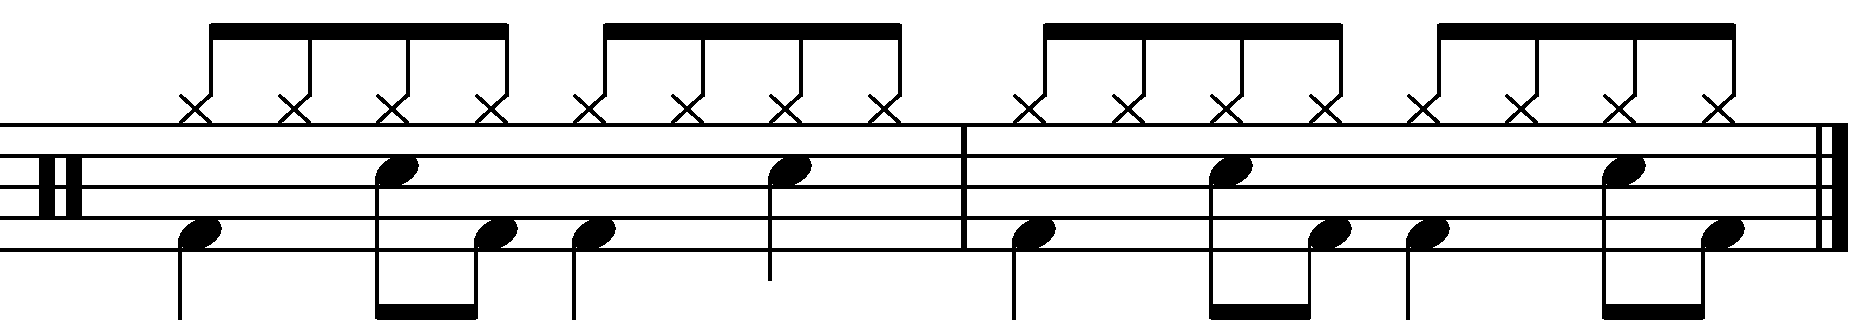 Additional 2 Bar Grooves - 1